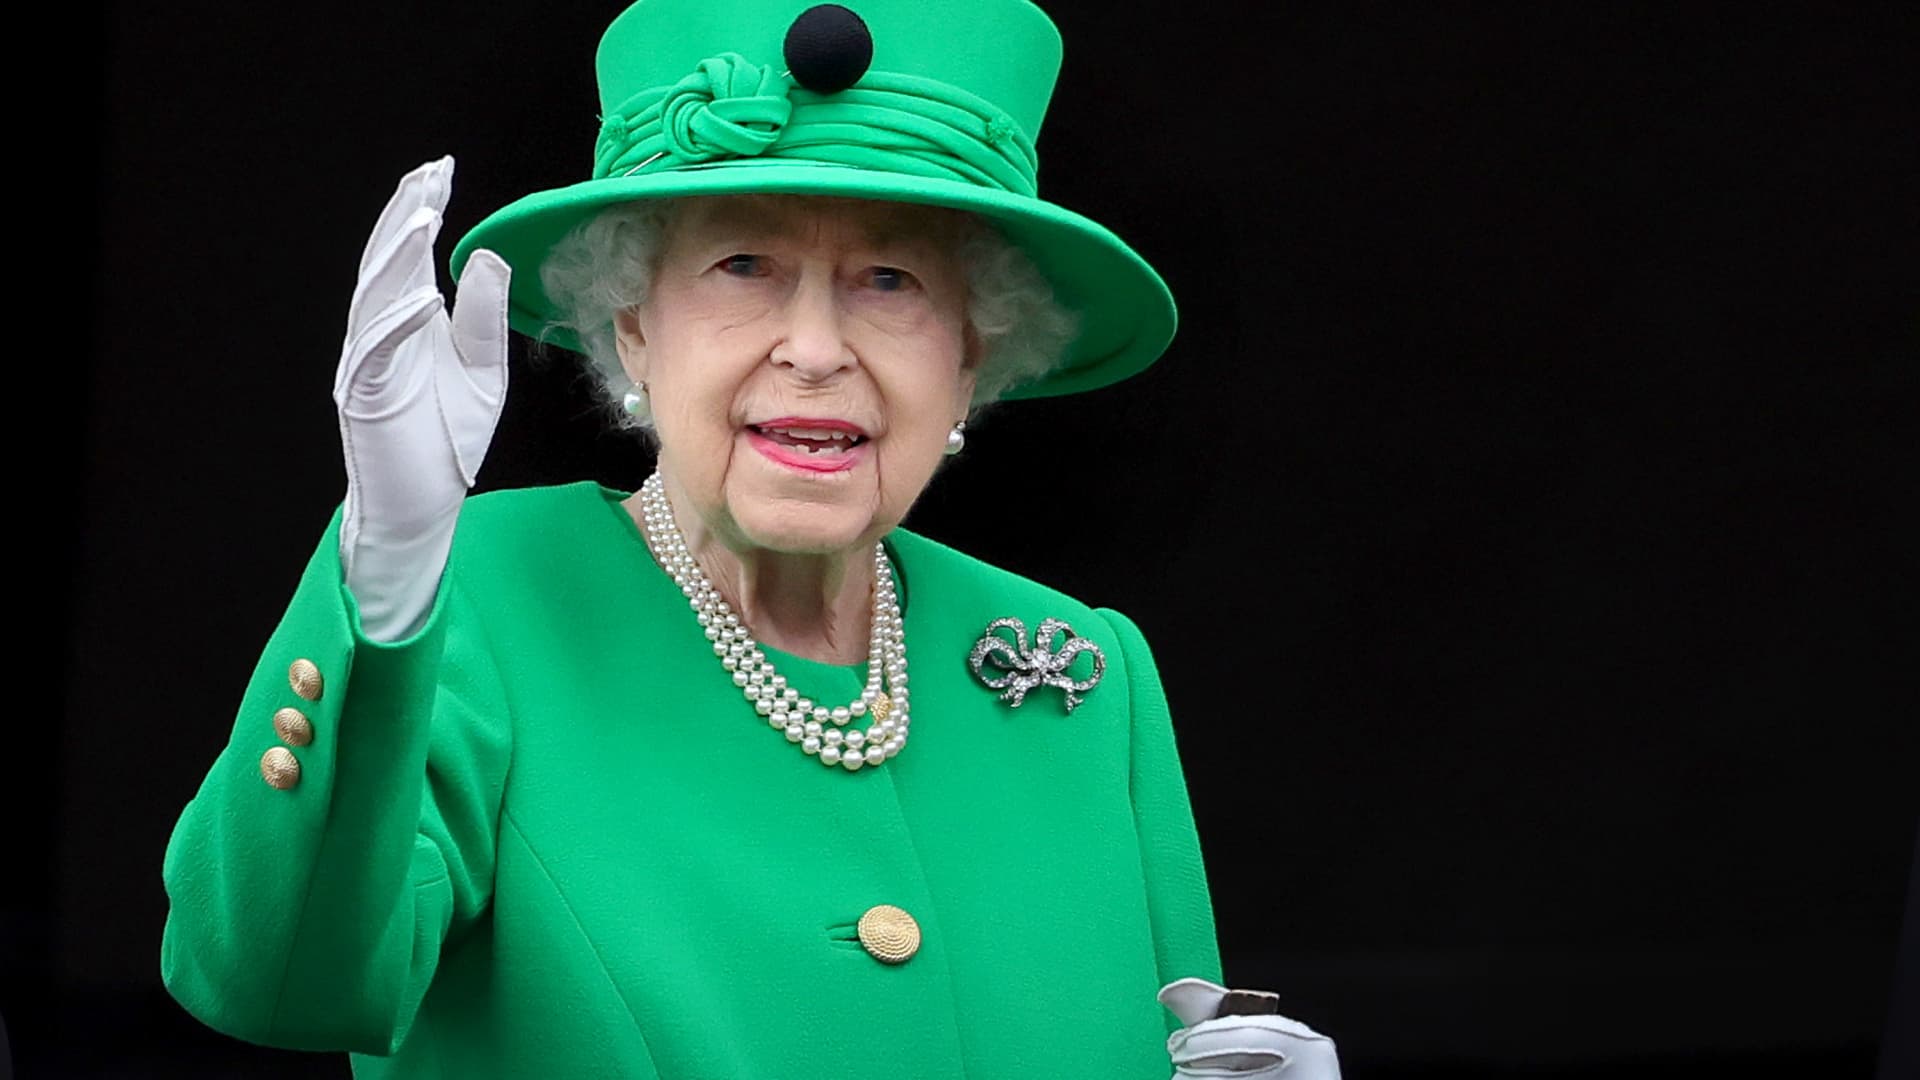 Corgis, castles and handbags: What happens to Queen’s wealth after her death?